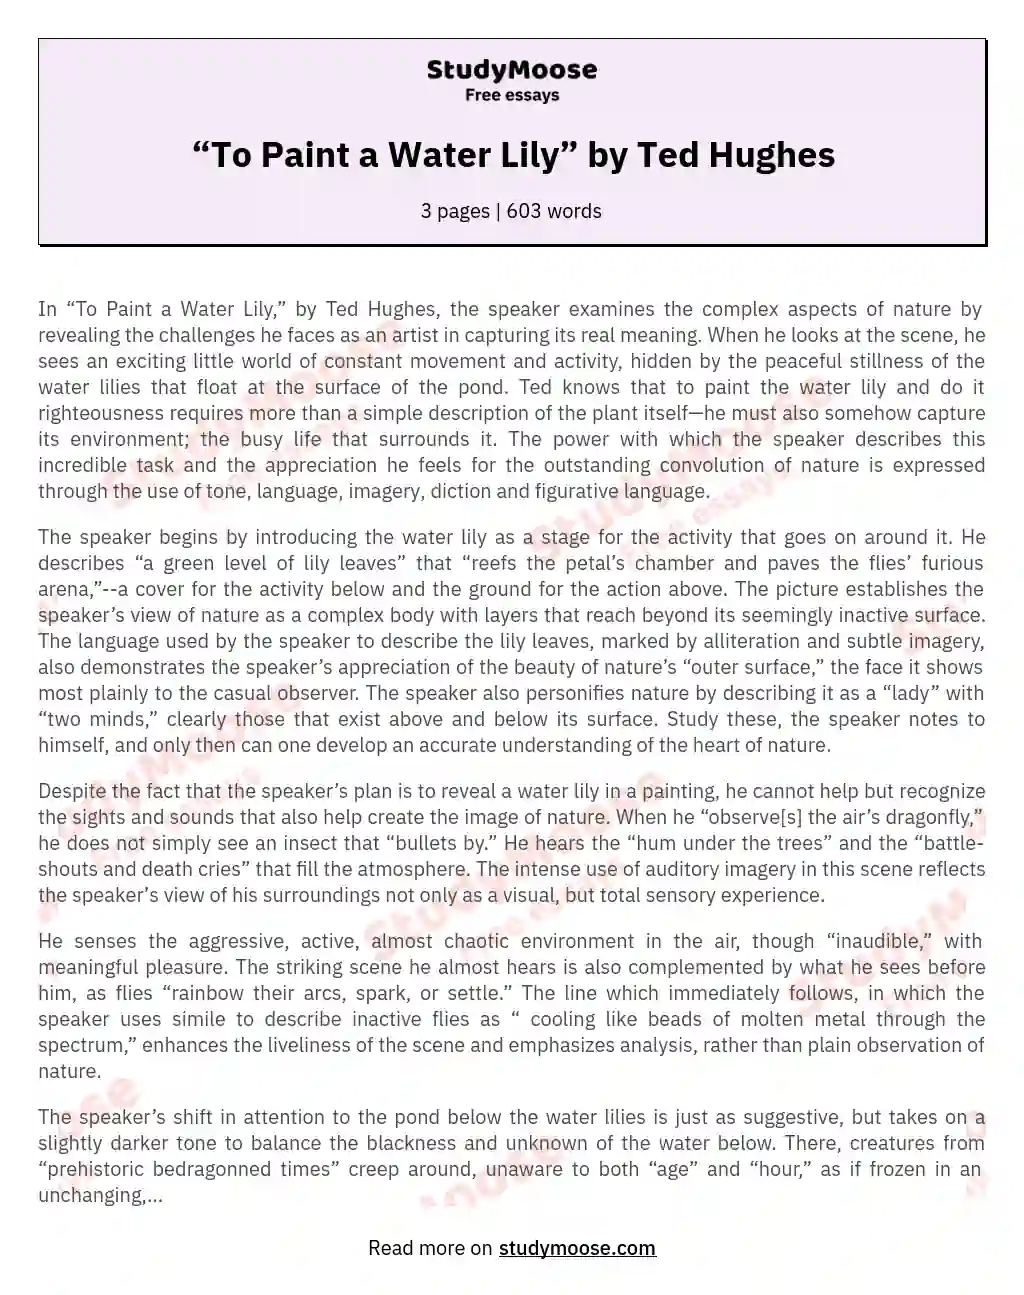 Capturing Nature's Complexity: Ted Hughes' "To Paint a Water Lily" essay